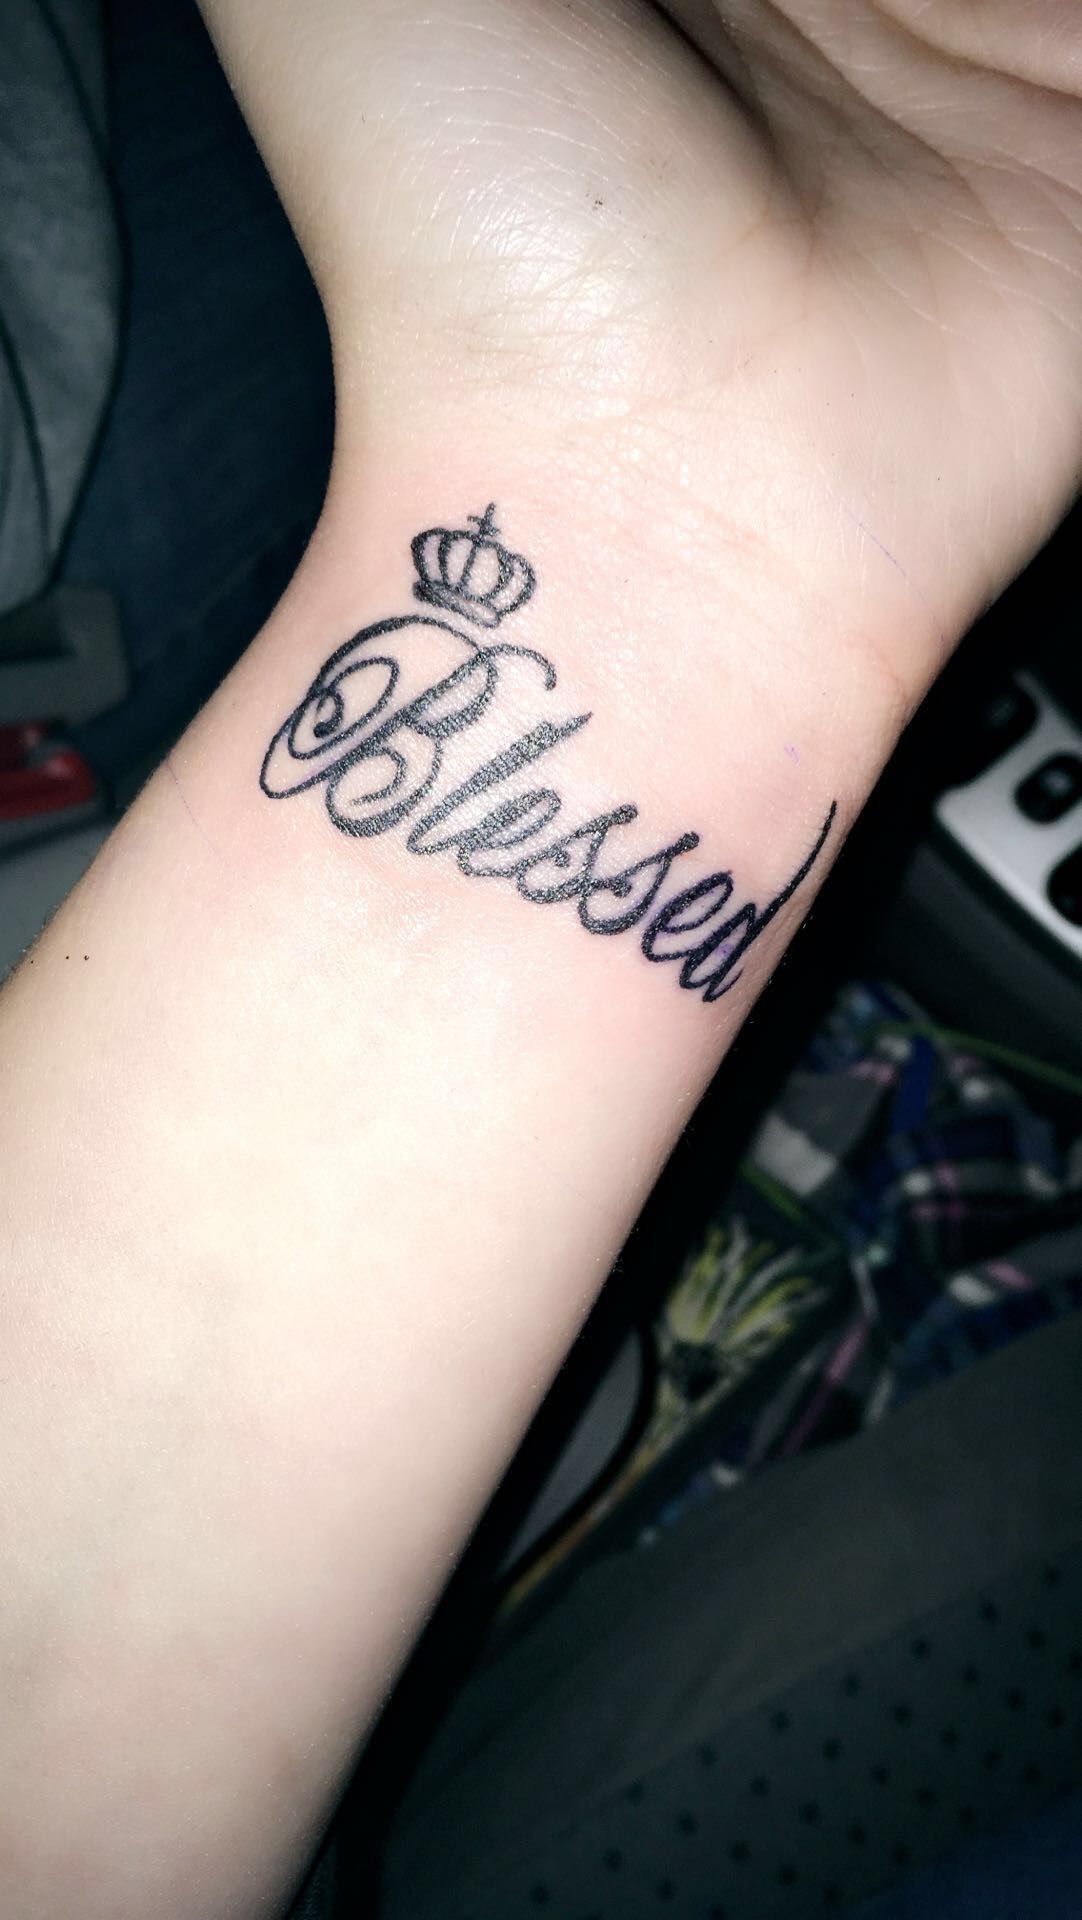 Black crown with blessed tattoo on inner wrist for women